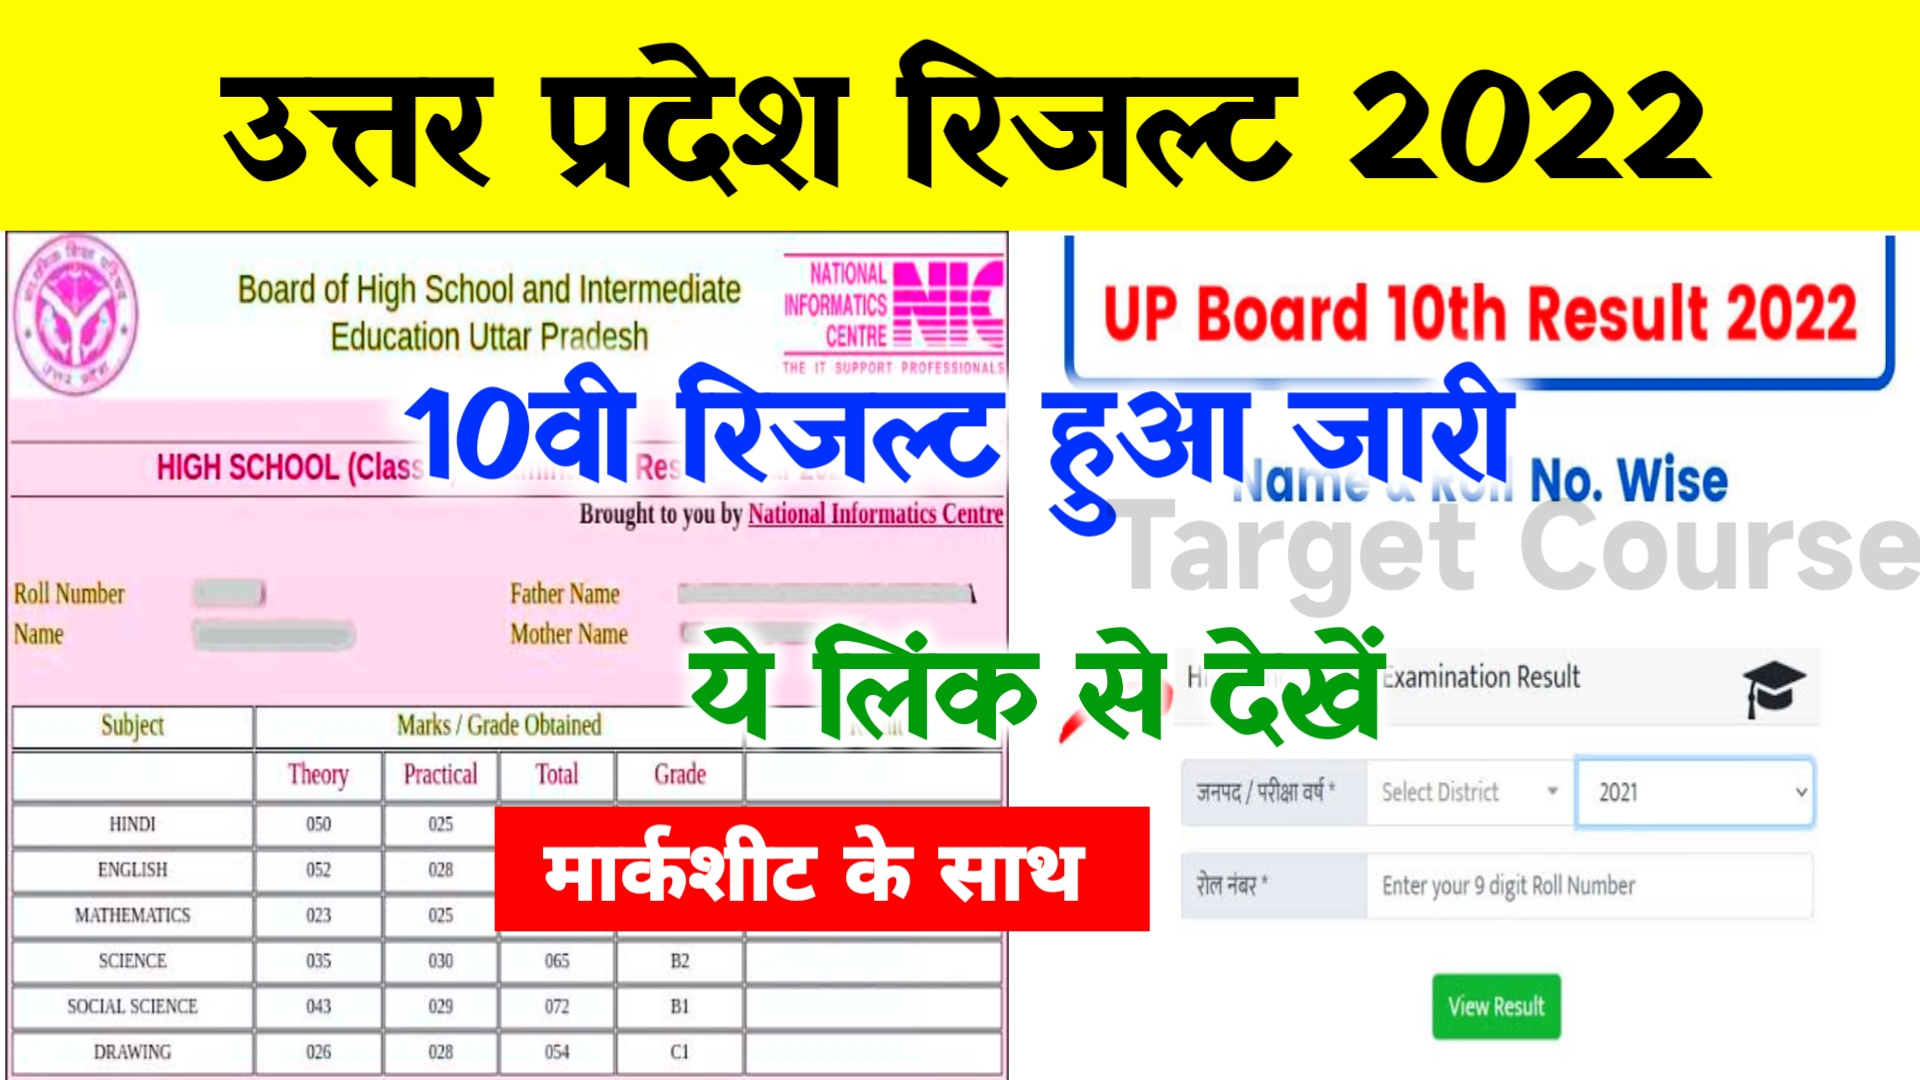 Up Board 10th Result 2022 Check ~ Live Result @upresults.nic.in